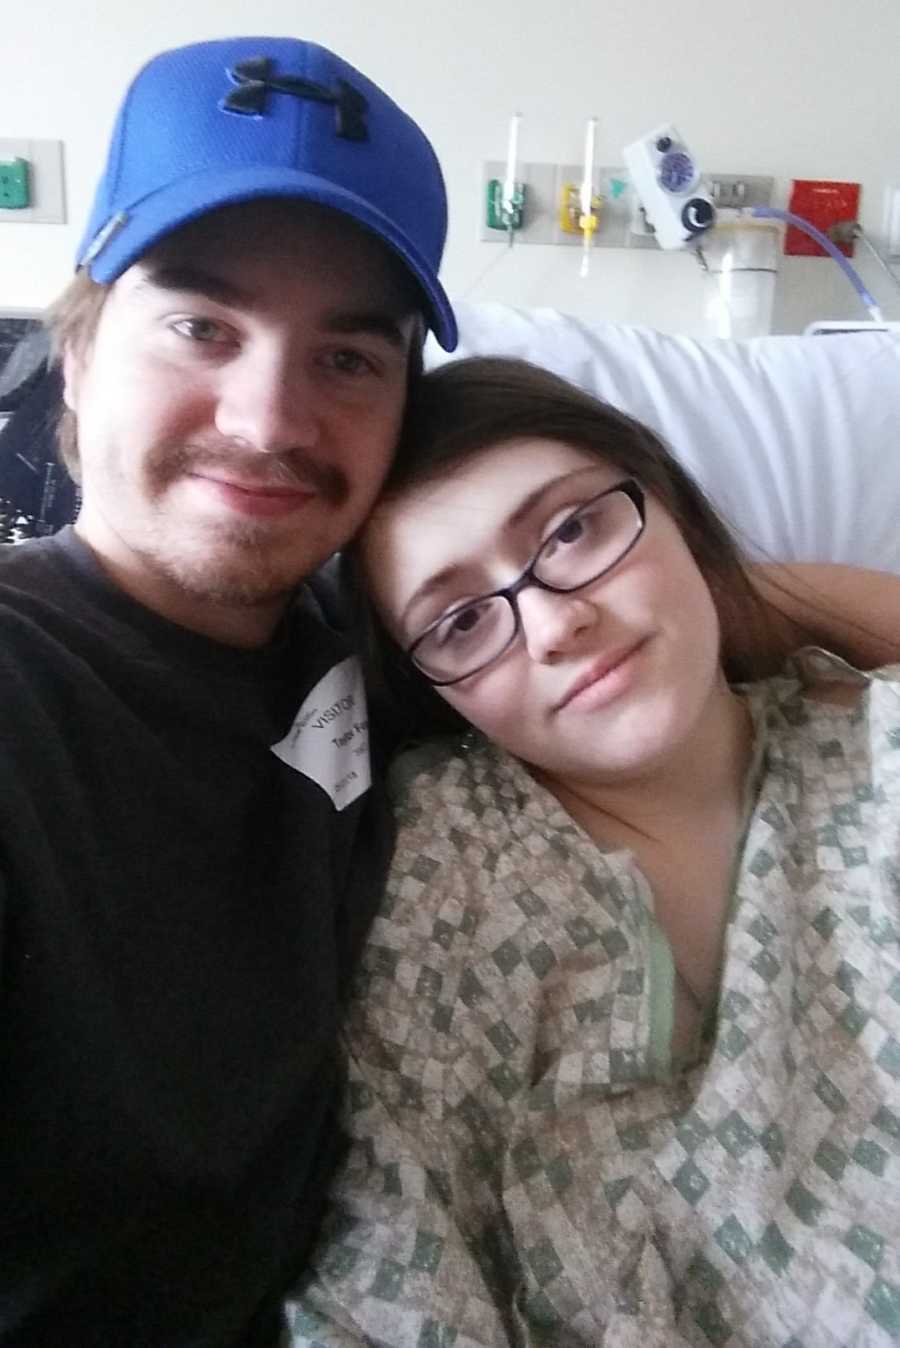 Husband stands smiling with arm around wife who sits in hospital bed in selfie